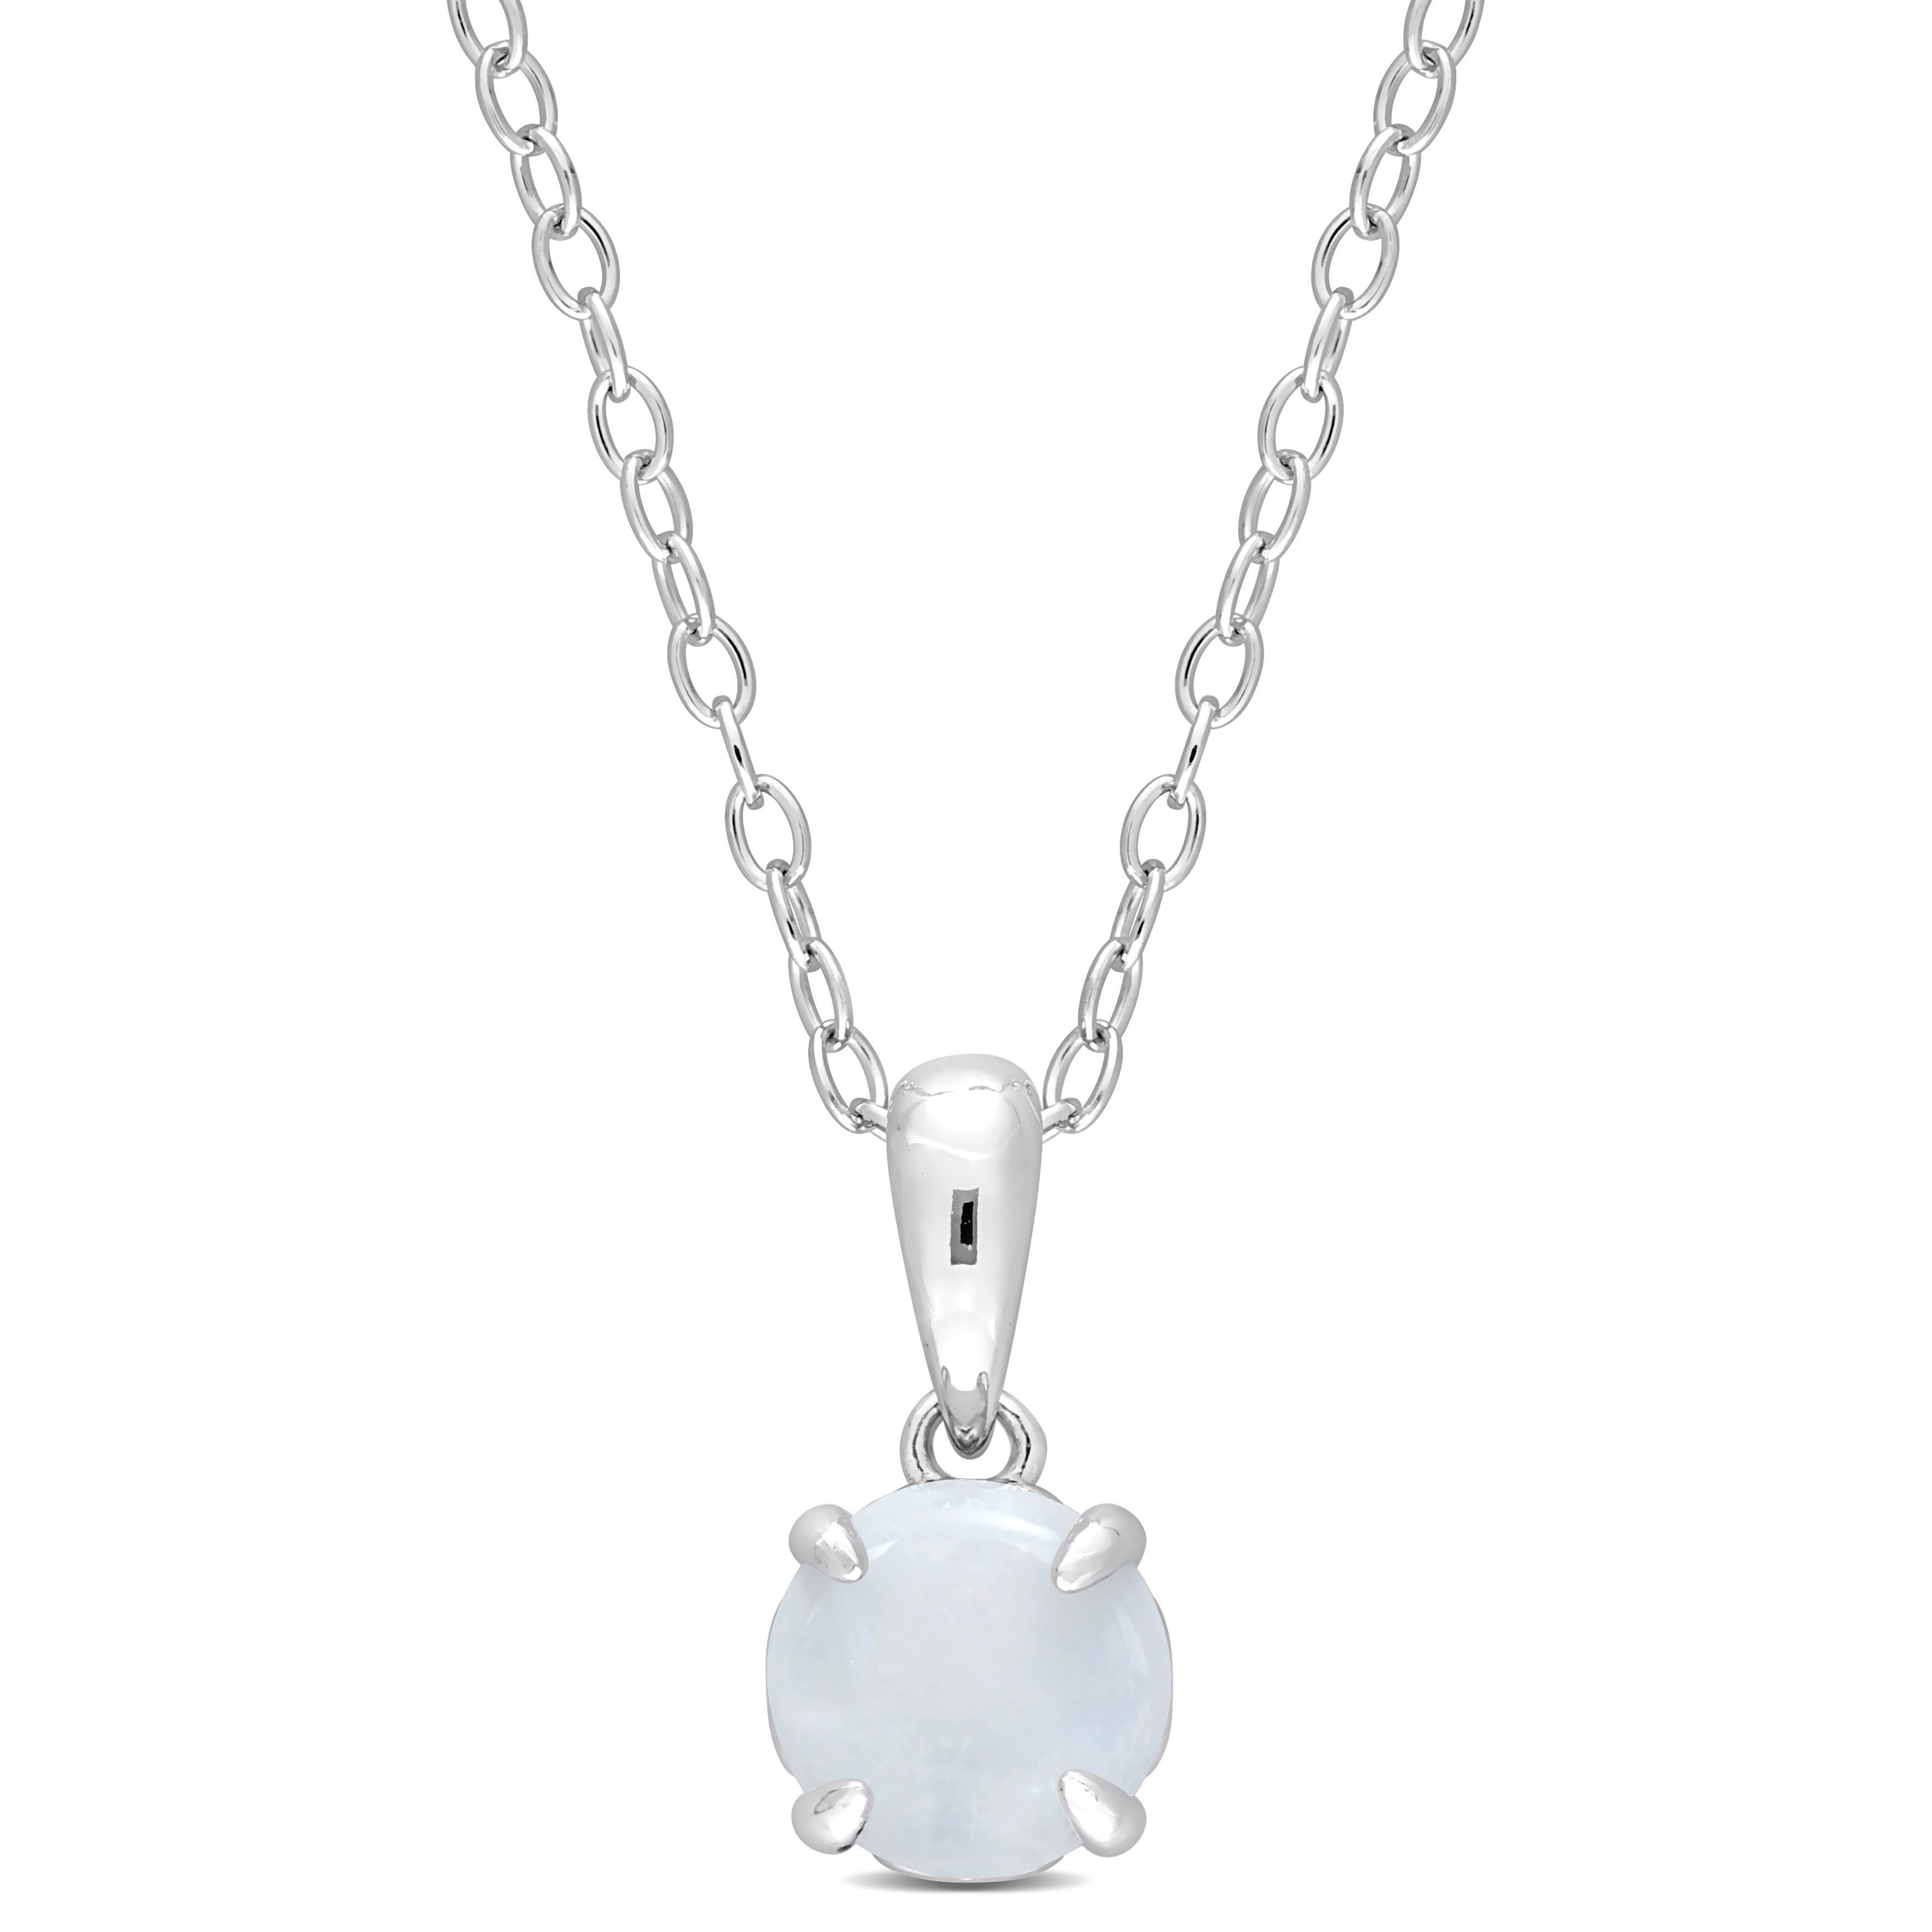 5/8 CT TGW Opal Solitaire Heart Design Pendant with Chain in Sterling Silver - 18 in.